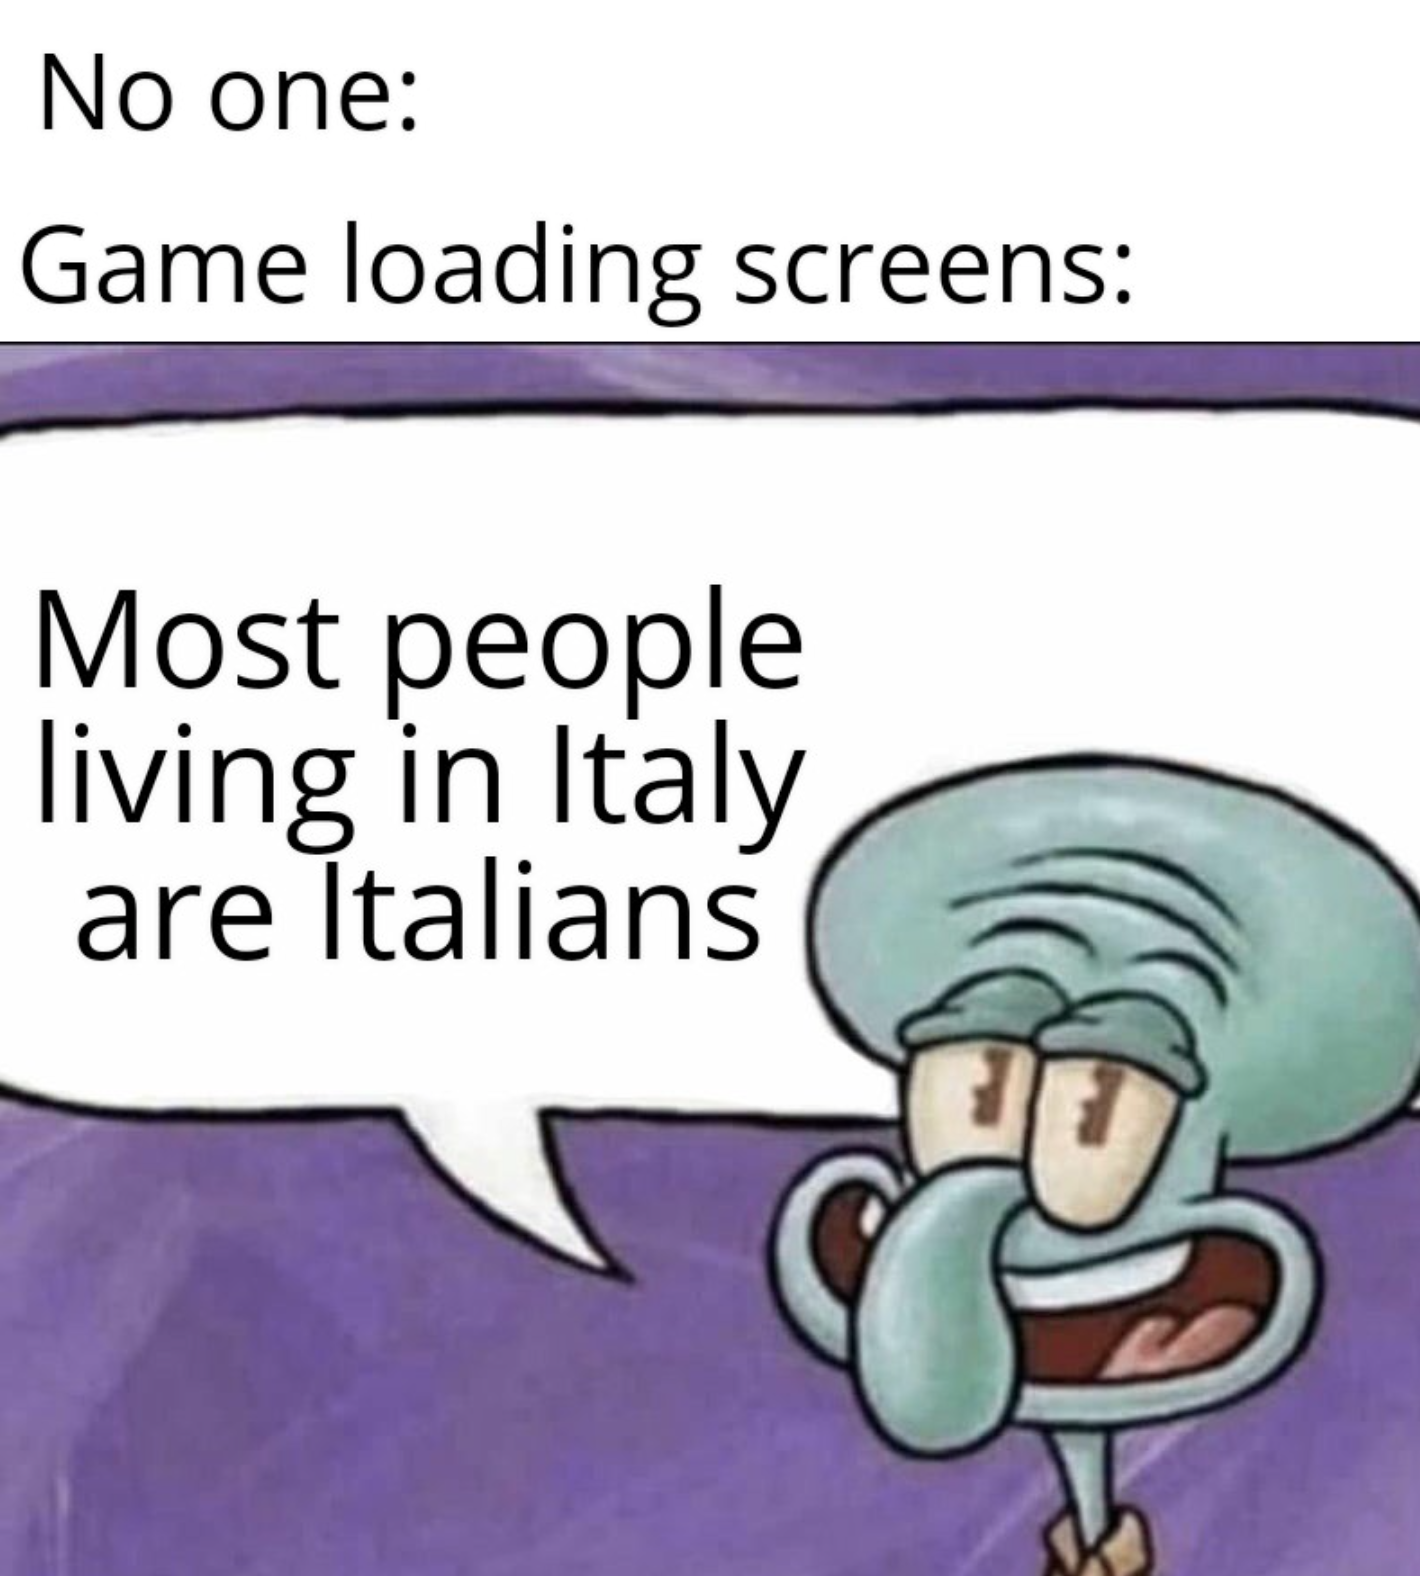 funny gaming memes - squidward meme pyrocynical - No one Game loading screens Most people living in Italy are Italians